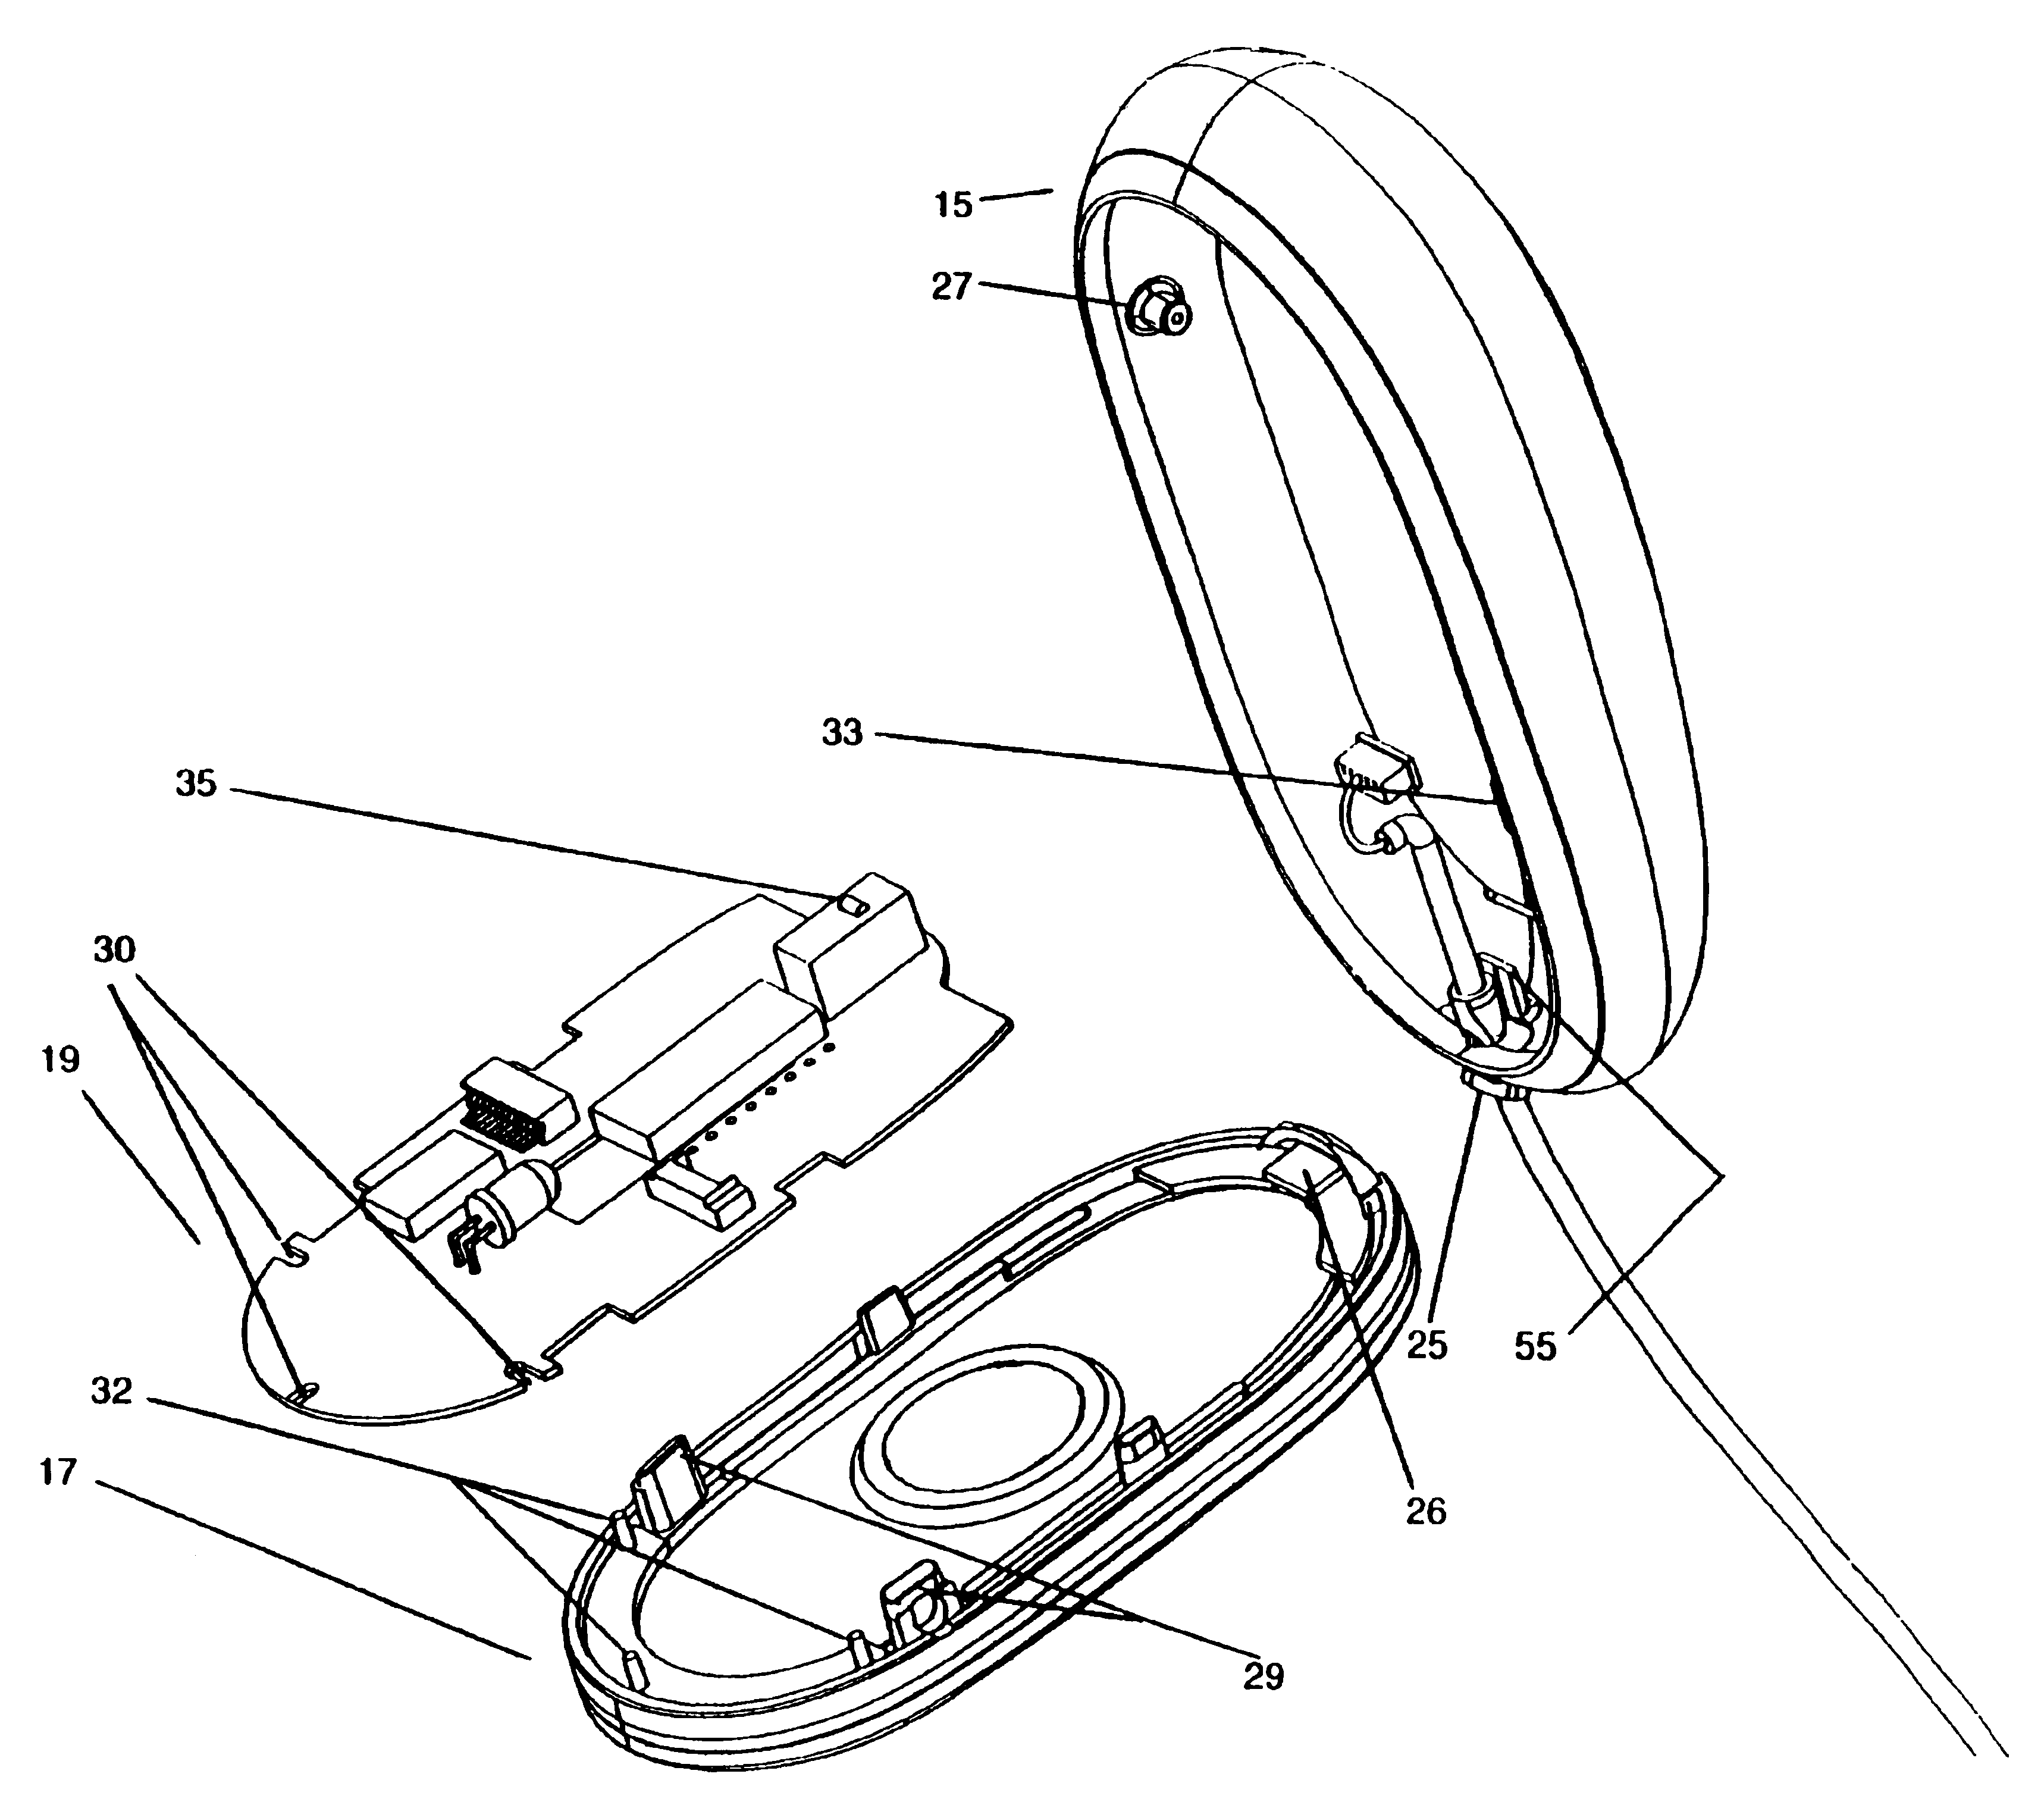 Computer mouse having side areas to maintain a depressed button position